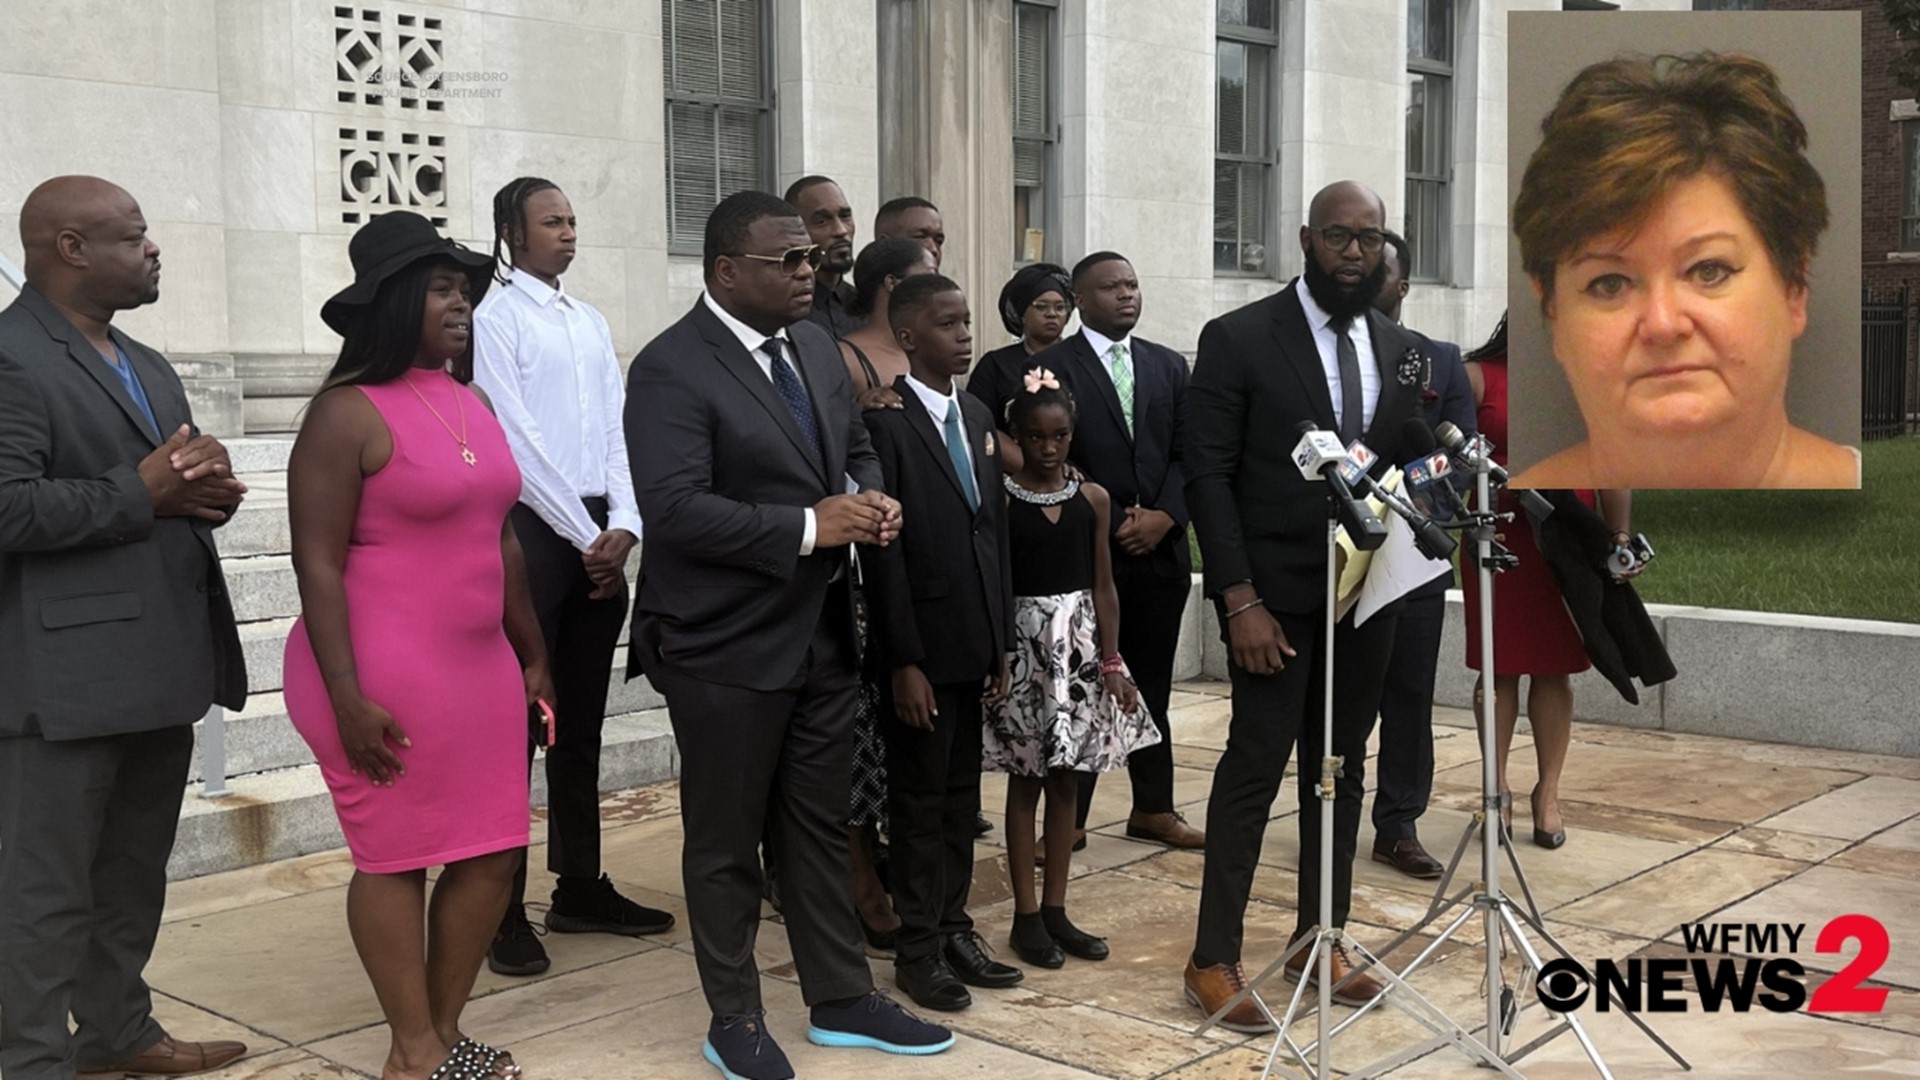 Attorneys Harry Daniels, Ben Crump, and Jason Keith announced the filing of a federal lawsuit against the case where a little boy was assaulted.